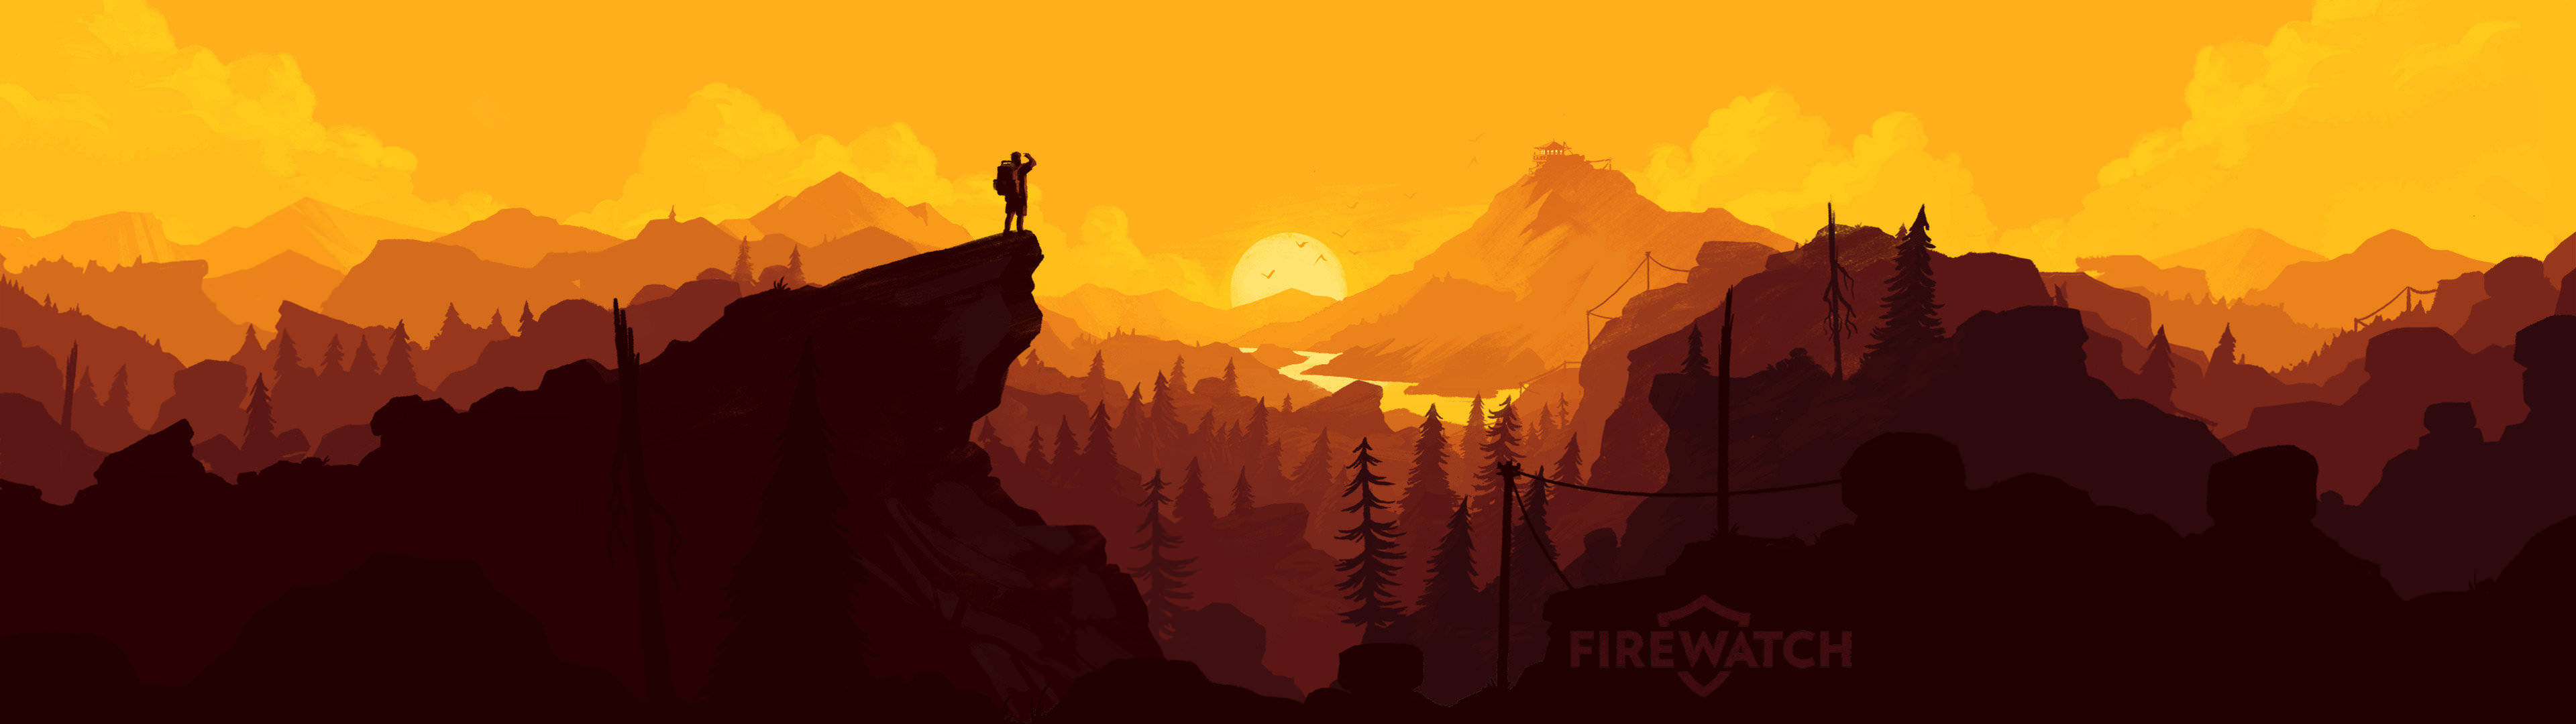 Get lost in the adventure of Dual Screen with Firewatch. Wallpaper